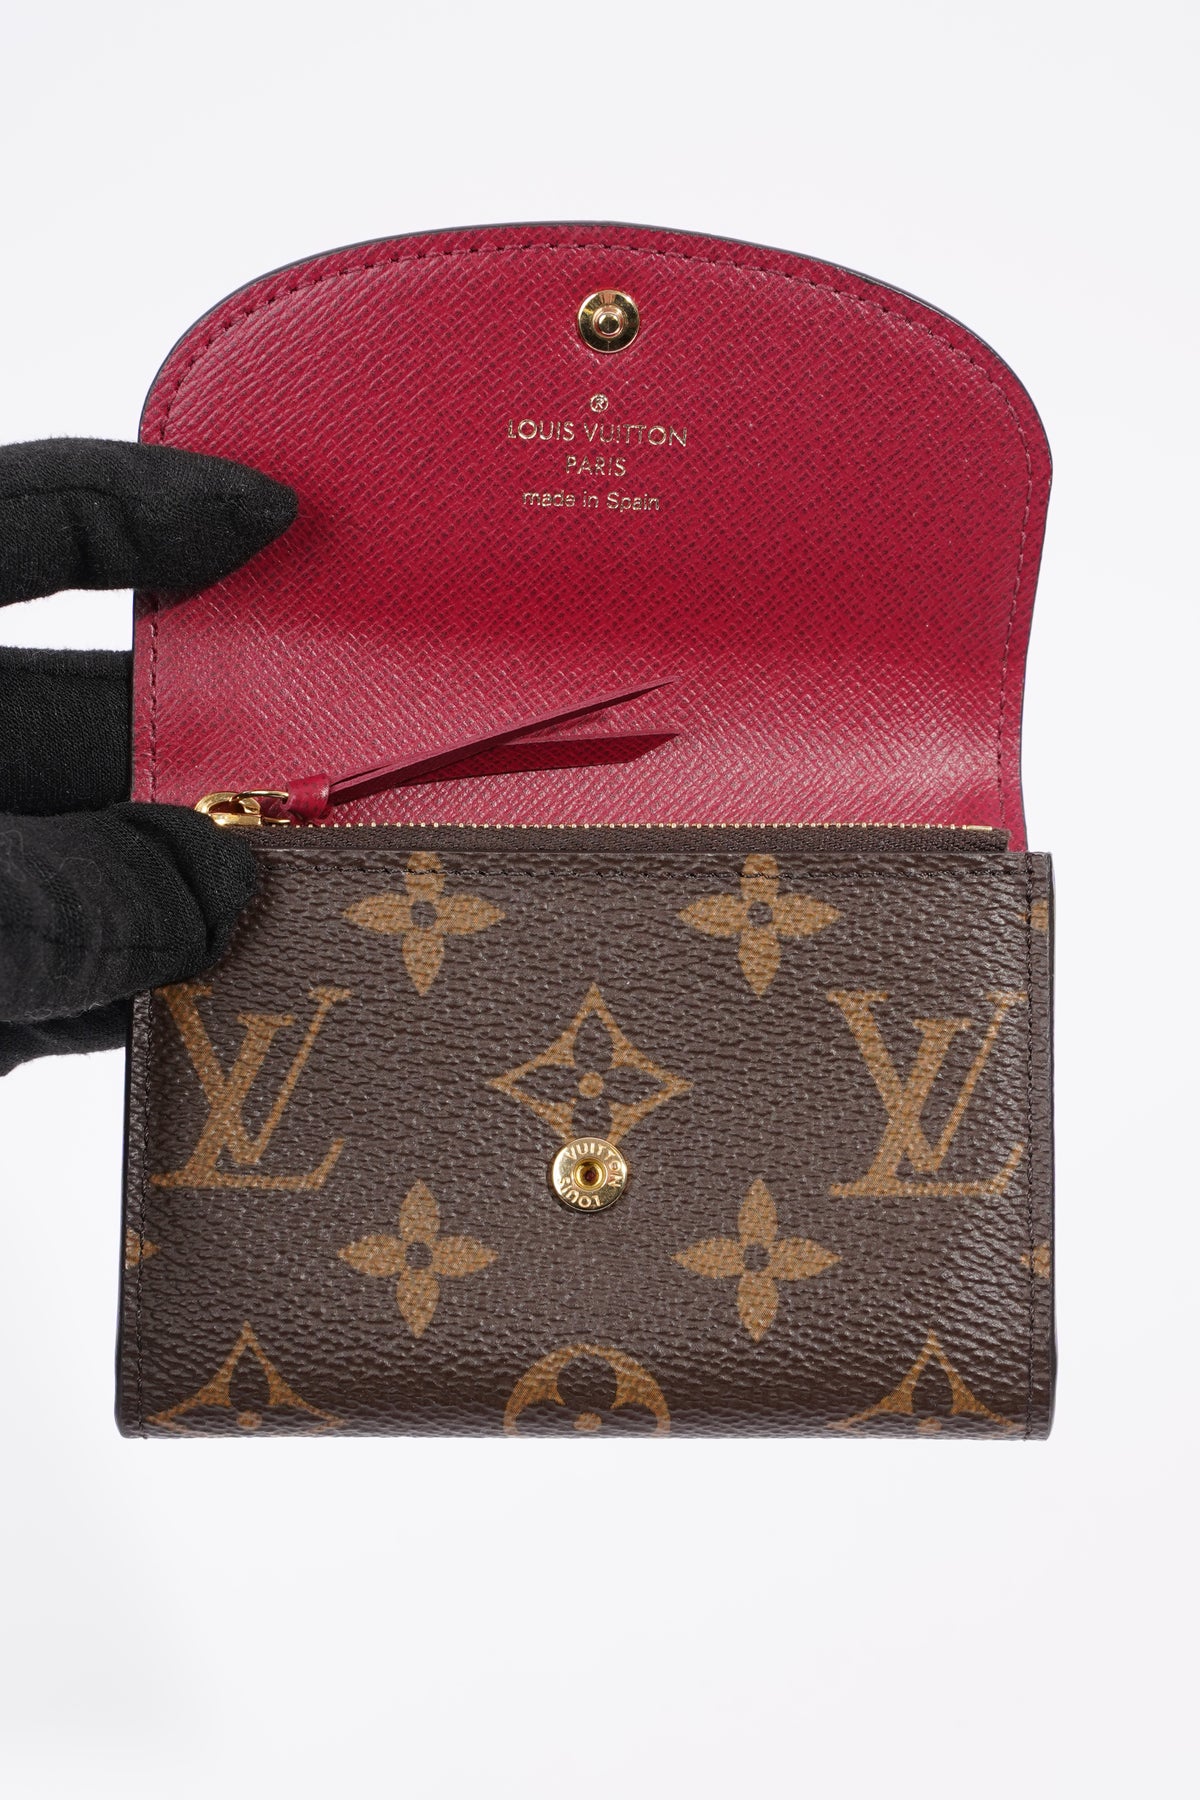 USED Louis Vuitton Monogram French Purse Wallet - MyDesignerly